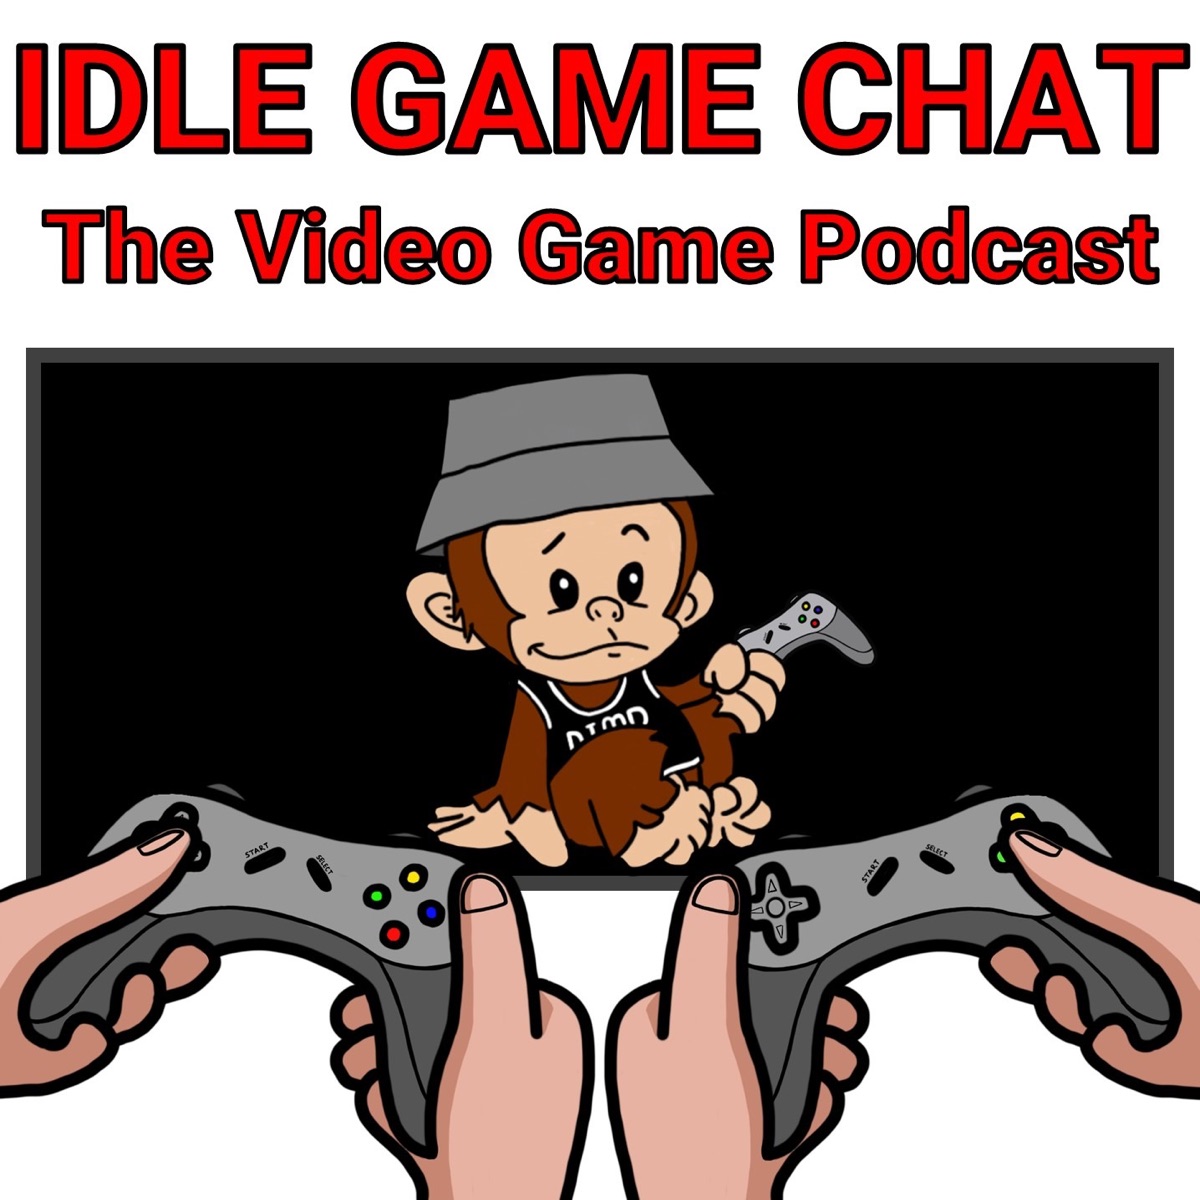 Idle Game Chat: The Video Game Podcast Podcast – Podtail